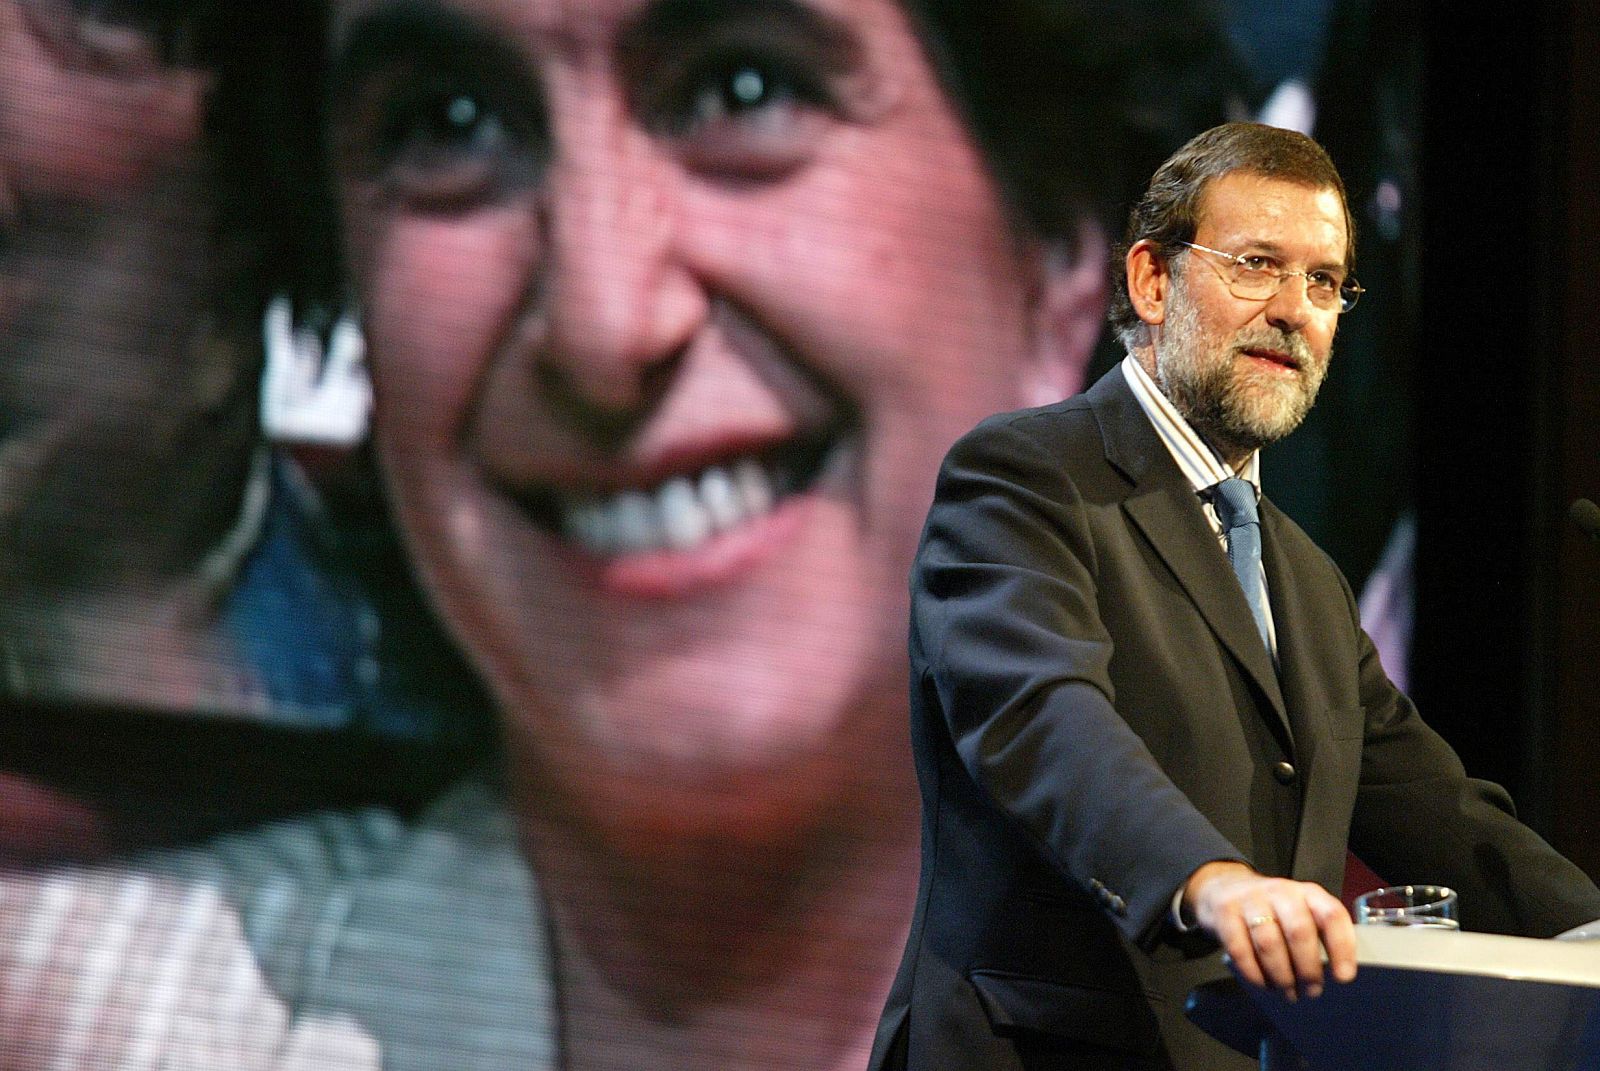 Spain's opposition leader Rajoy addresses an electoral meeting in Bilbao.